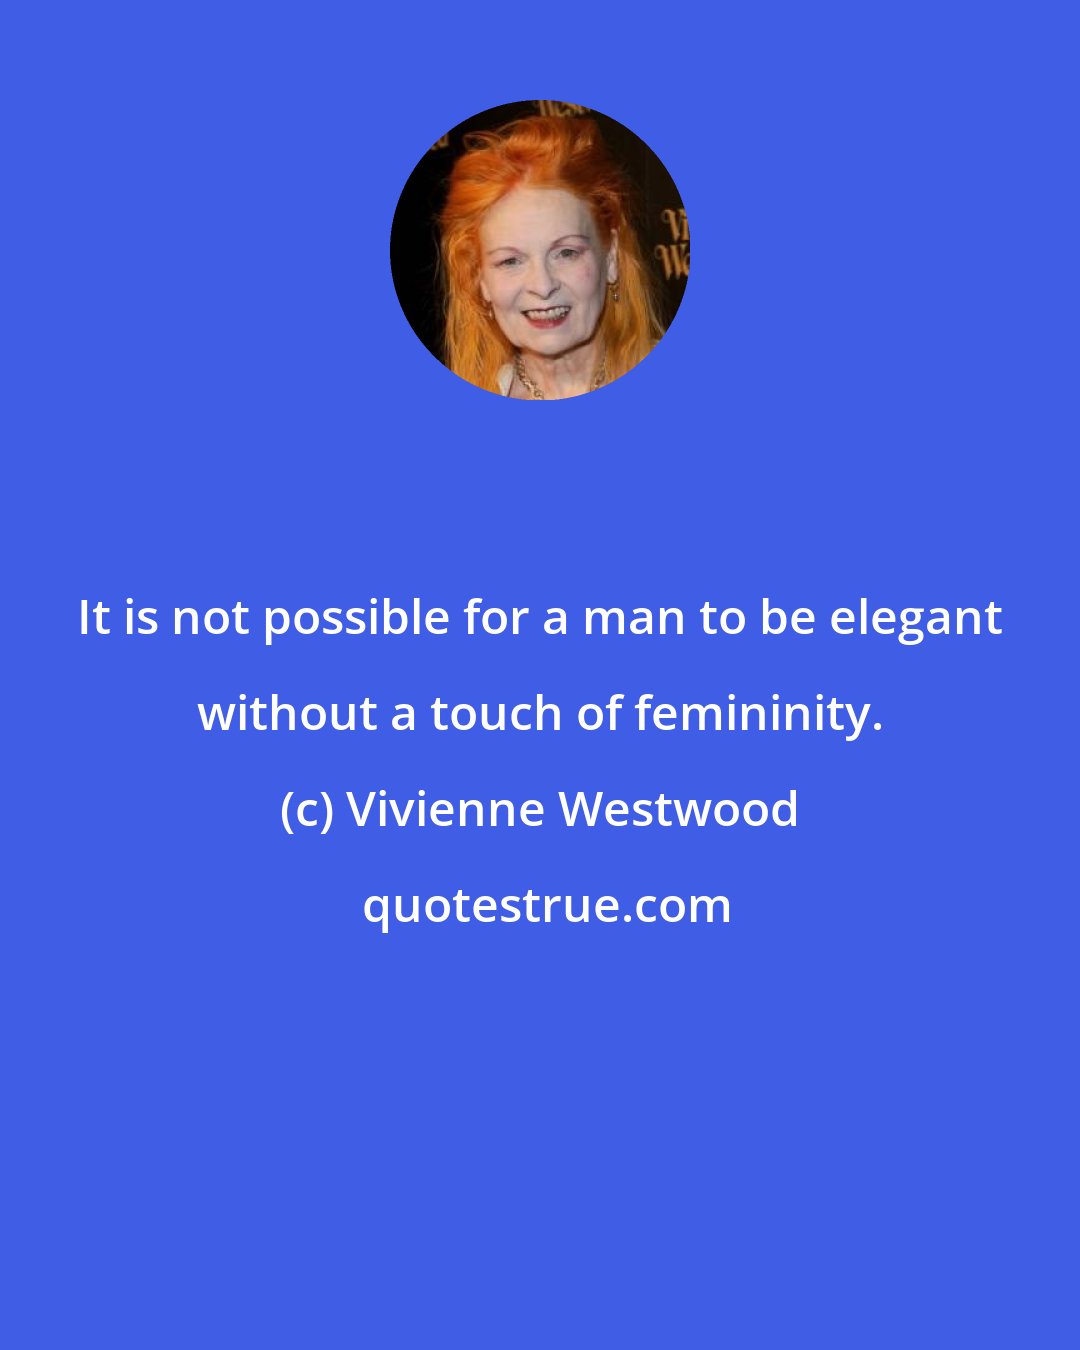 Vivienne Westwood: It is not possible for a man to be elegant without a touch of femininity.